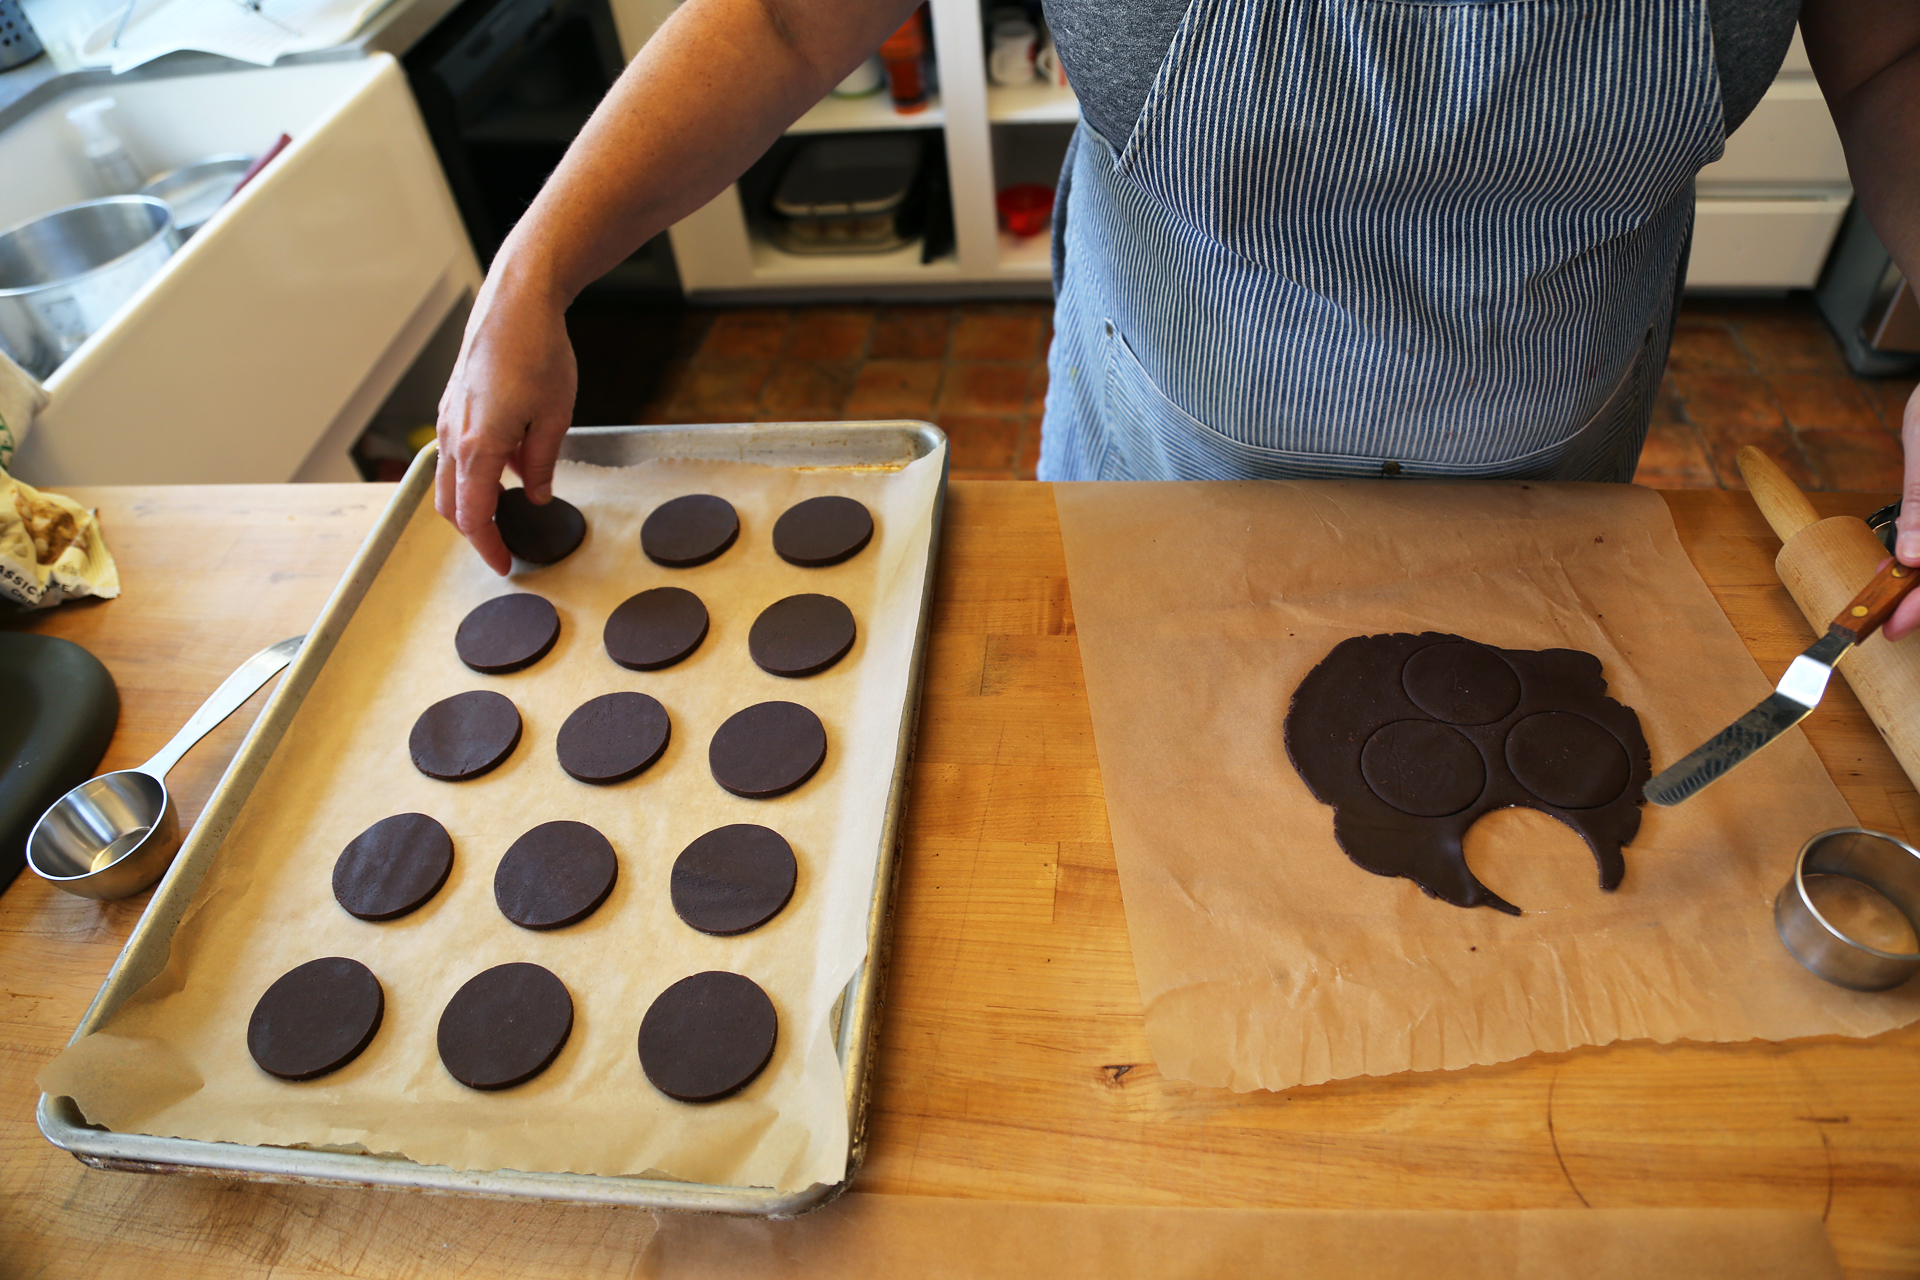 Transfer the cookies to a prepared baking sheet.